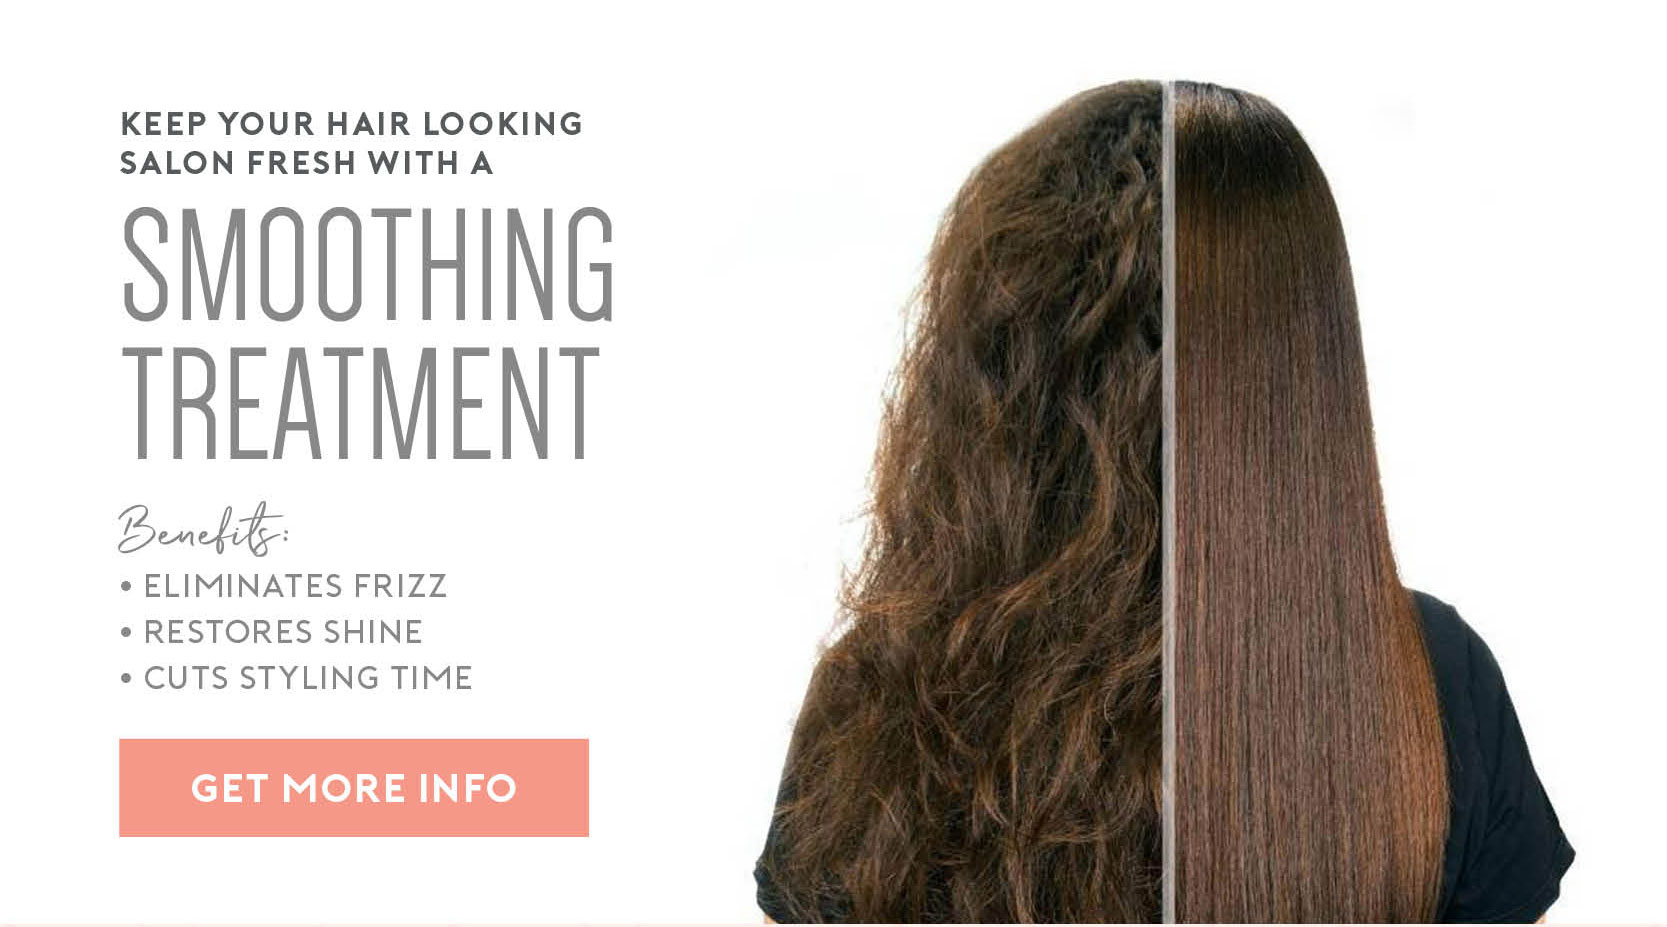 Keep your hair looking fresh with a smoothing treatment. Benefits include: Eliminate frizz, restore shine, and cut styling time. Click for more info. 